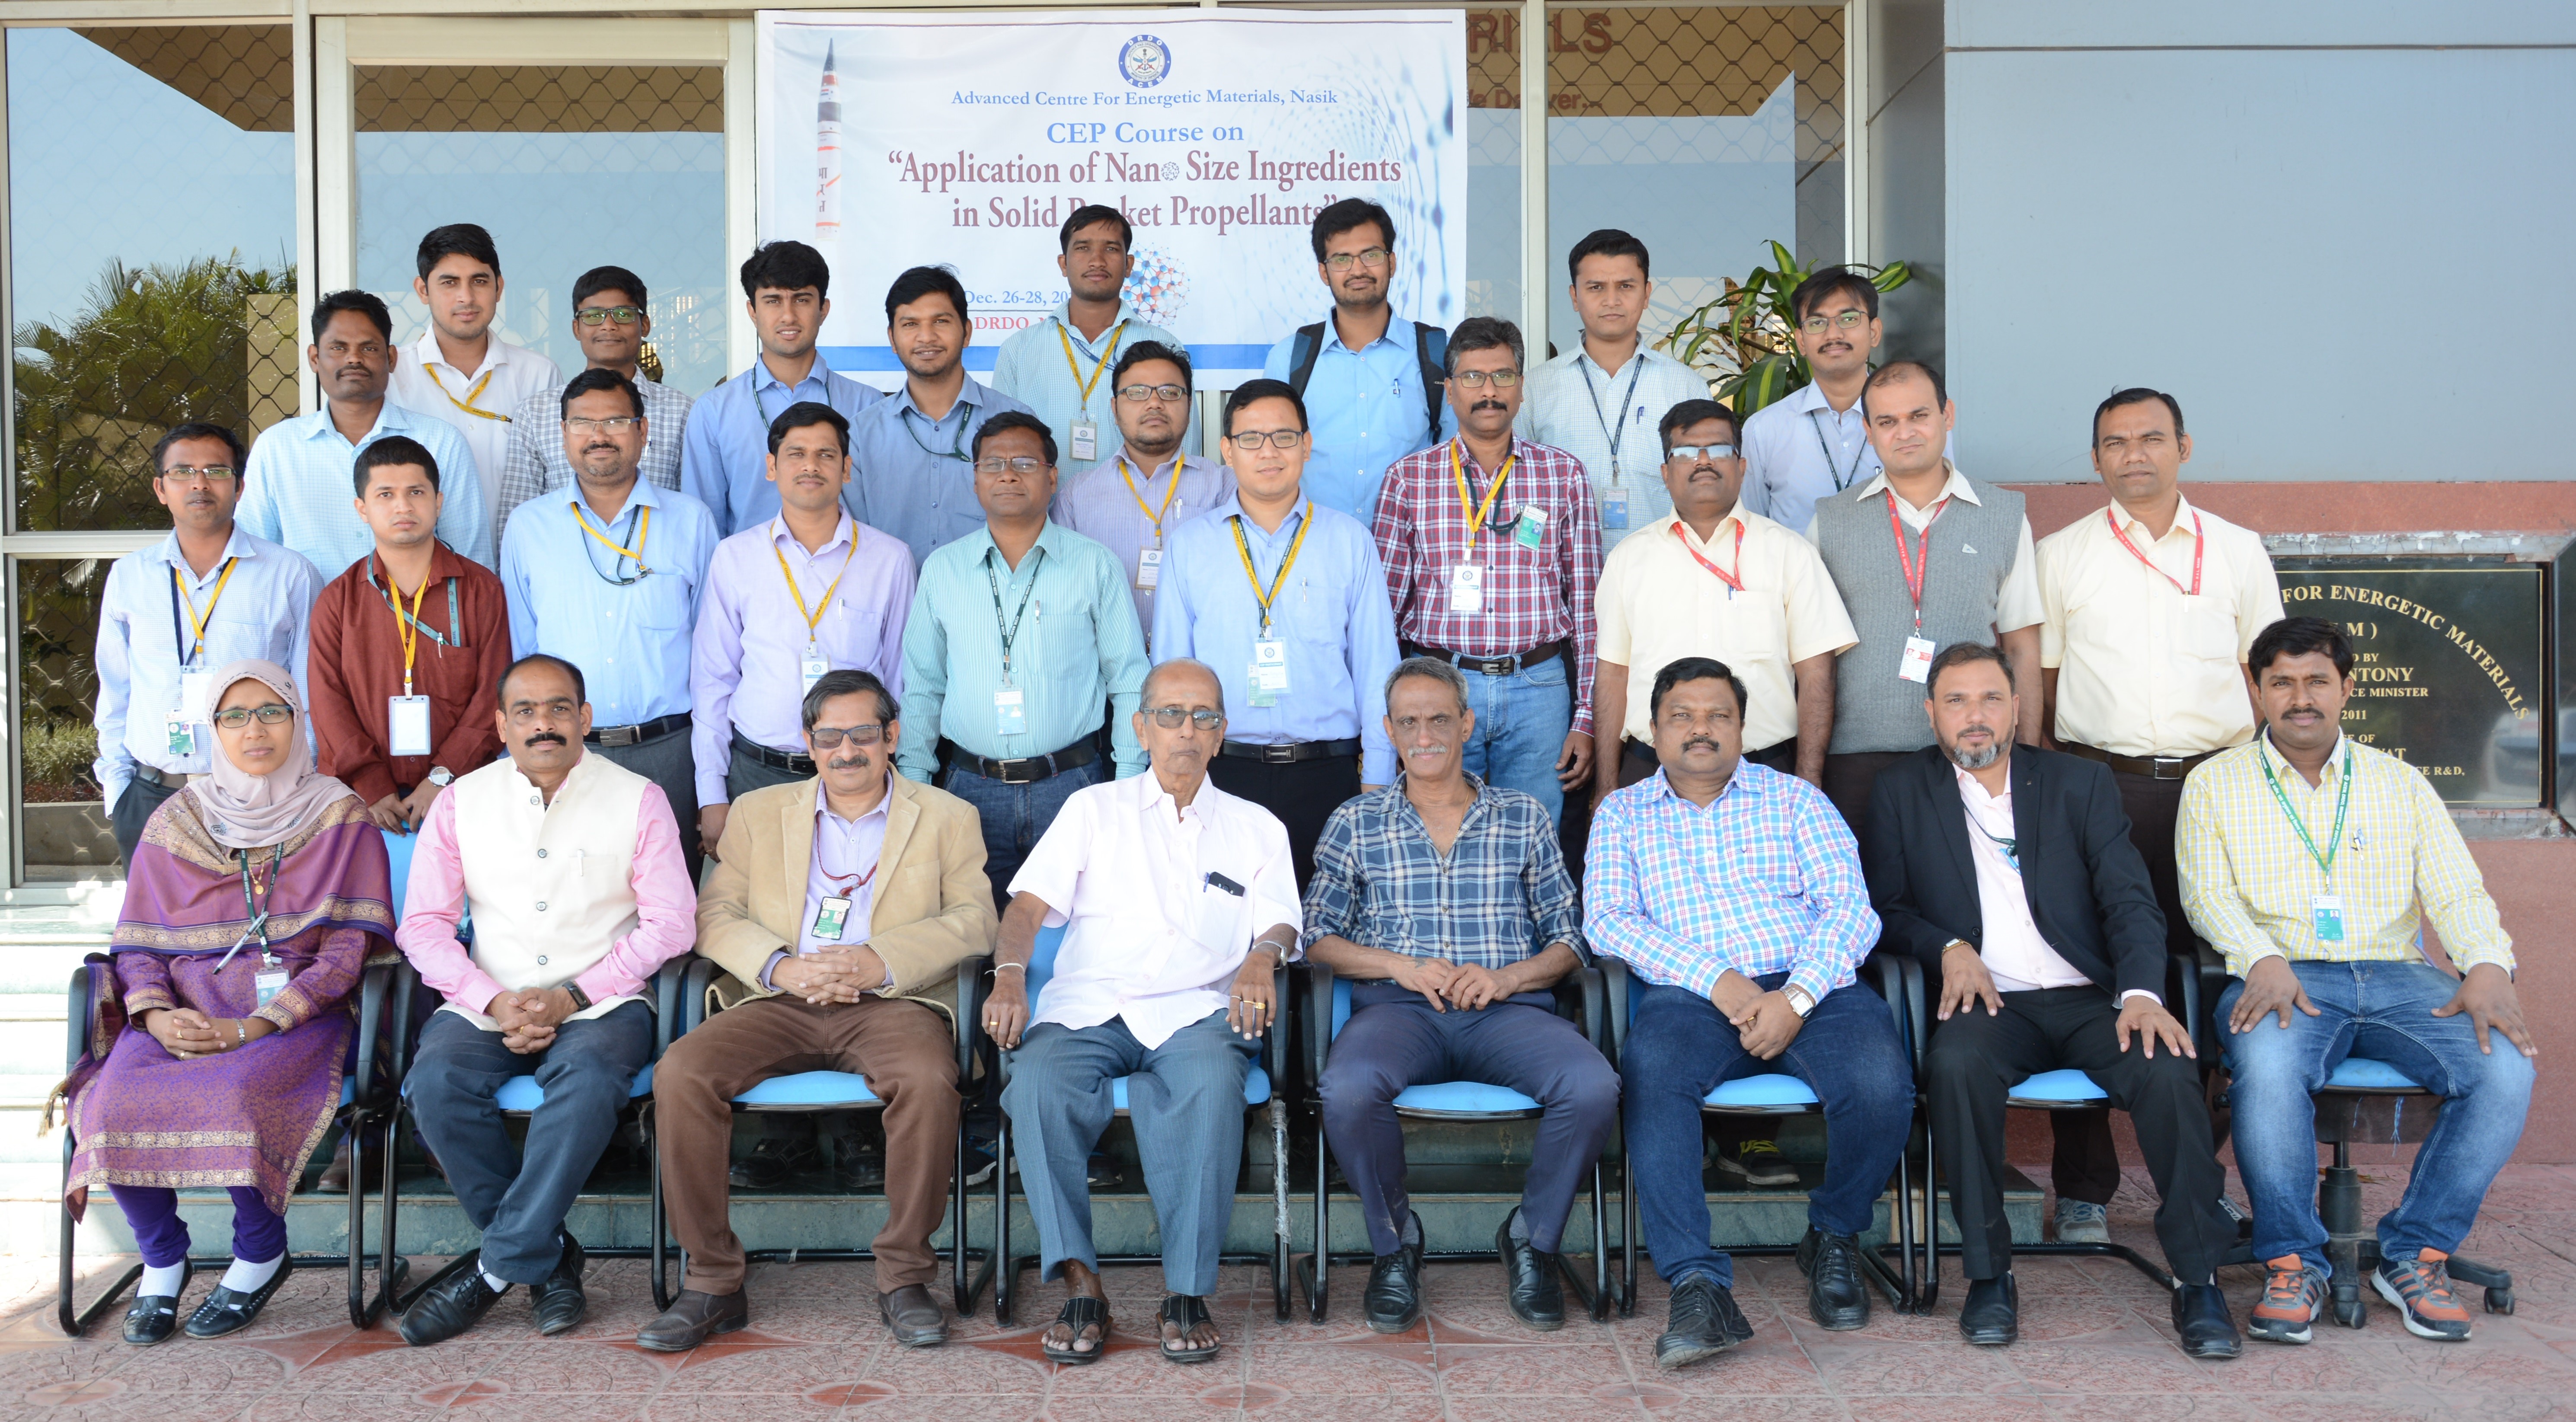 A CEP course on “Application of Nano Size Ingredients in Solid Rocket Propellants” 